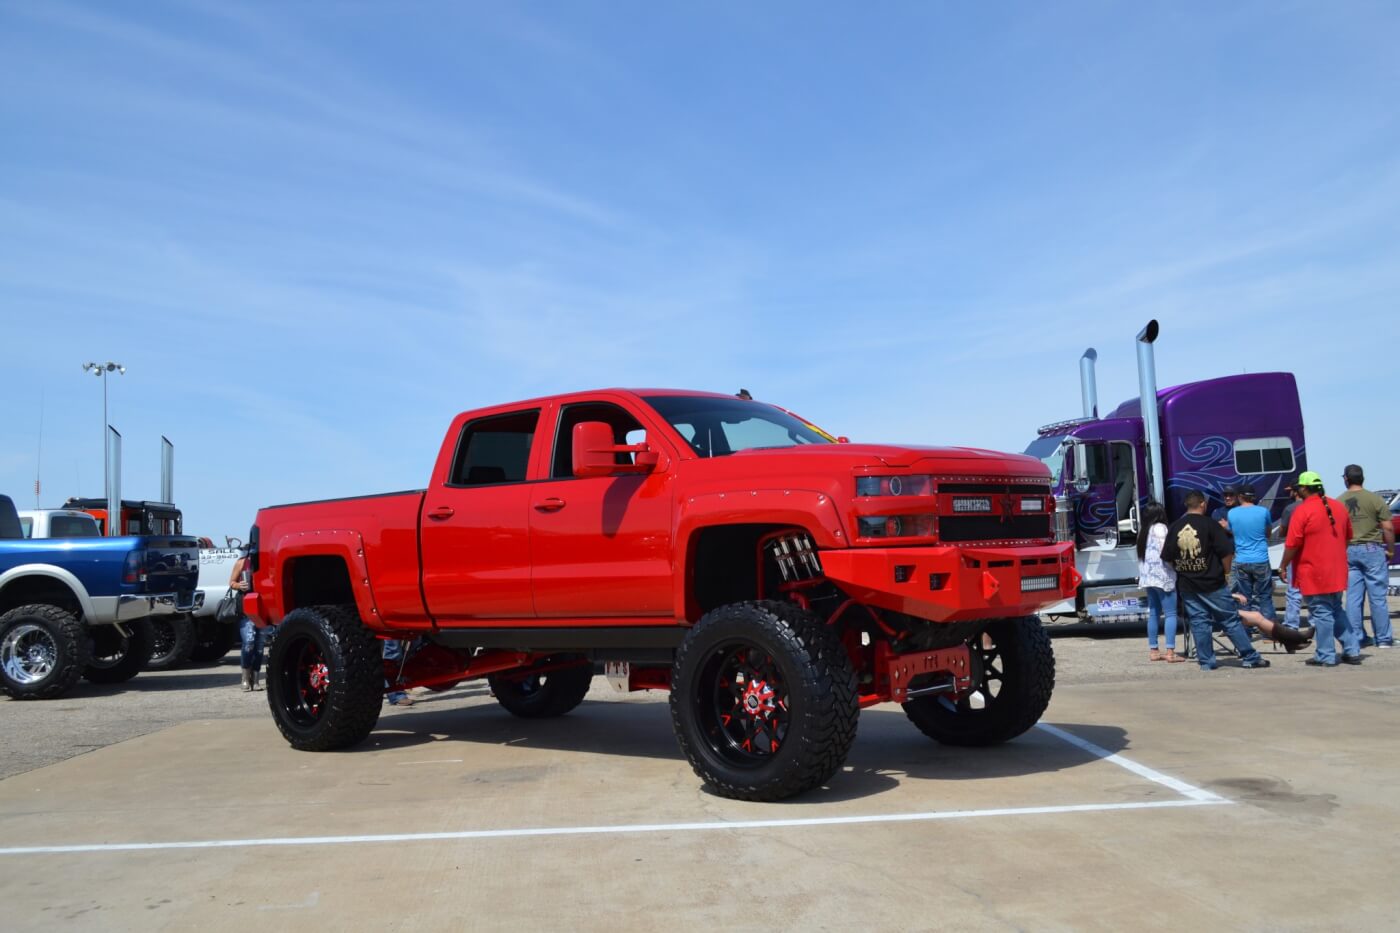 On Saturday, many trucks owners polished up their rigs to a bright sheen for the show 'n shine competition. This red Duramax-powered rig was one of the cleanest and most tastefully modified rides in attendance.